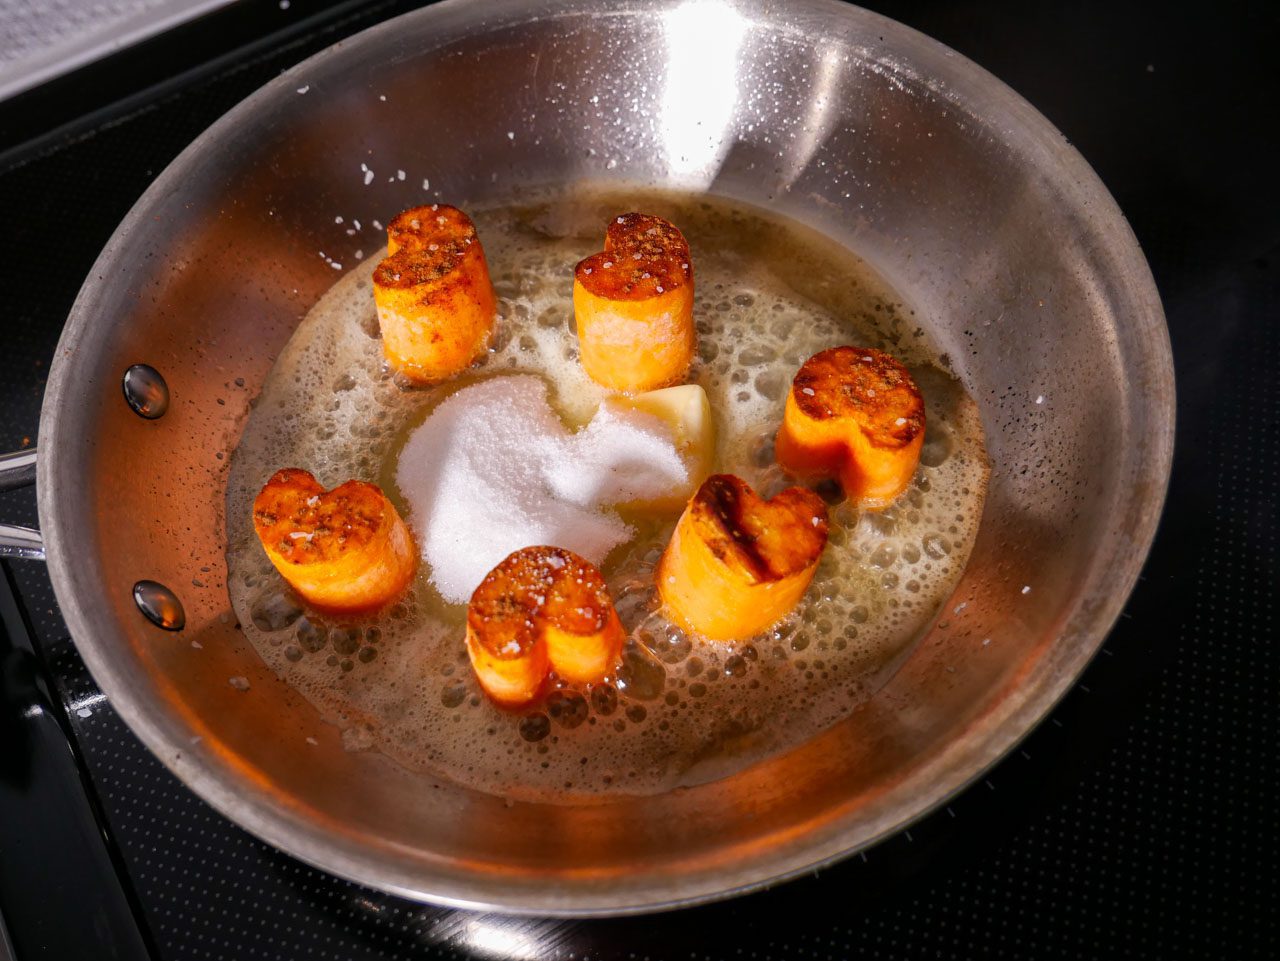 Butter and sugar added to heart-shaped sweet potatoes in a frying pan